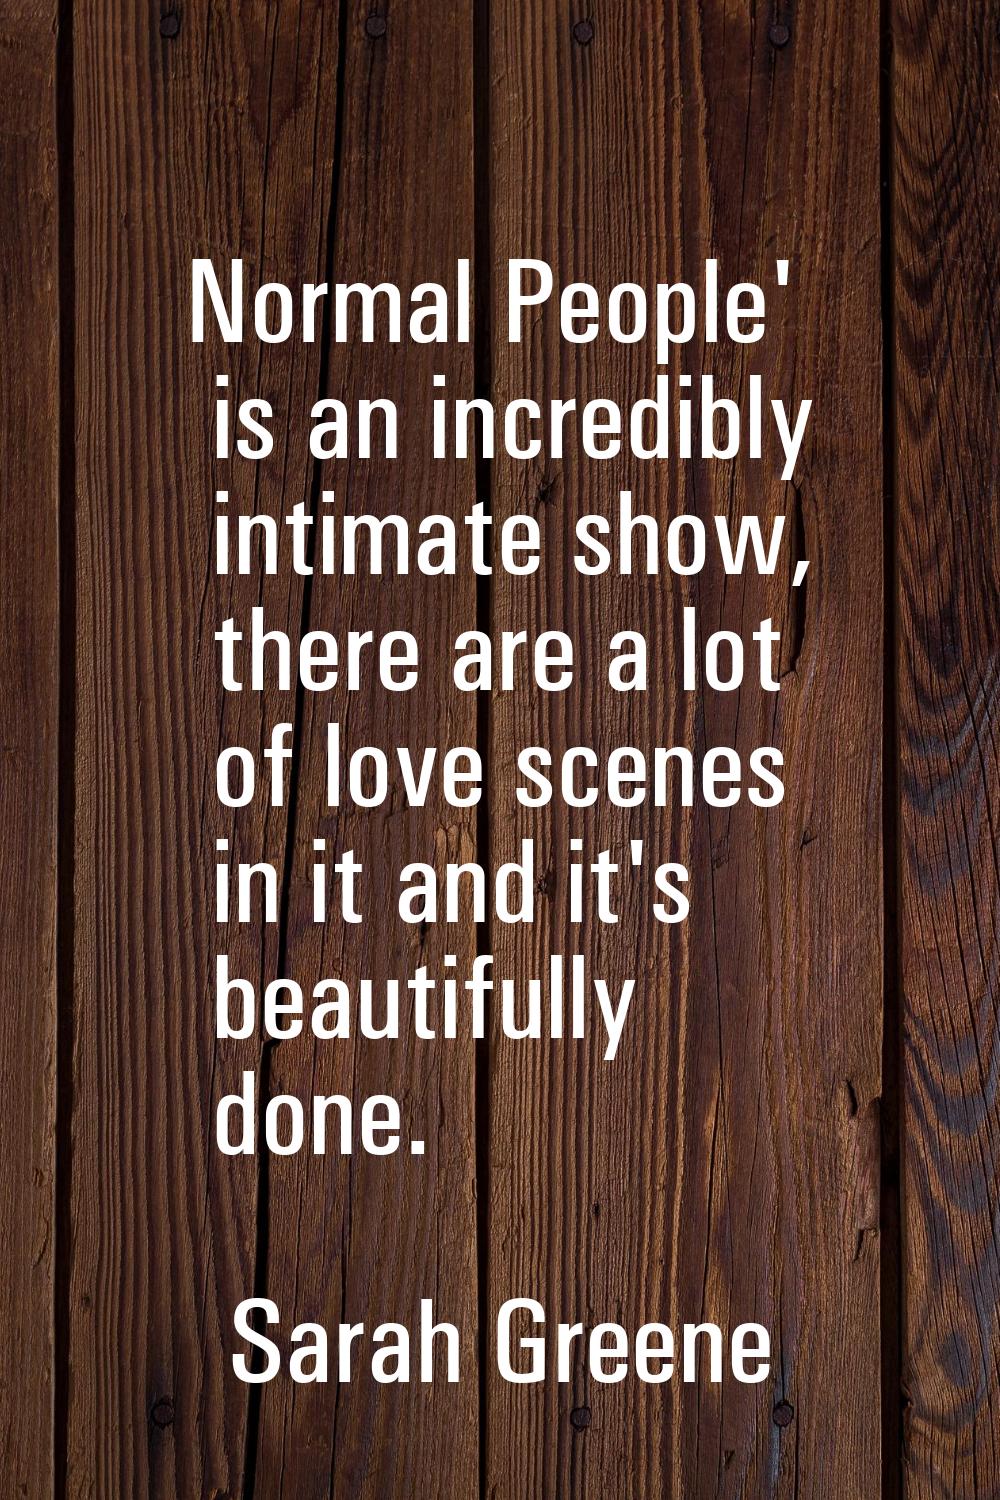 Normal People' is an incredibly intimate show, there are a lot of love scenes in it and it's beauti